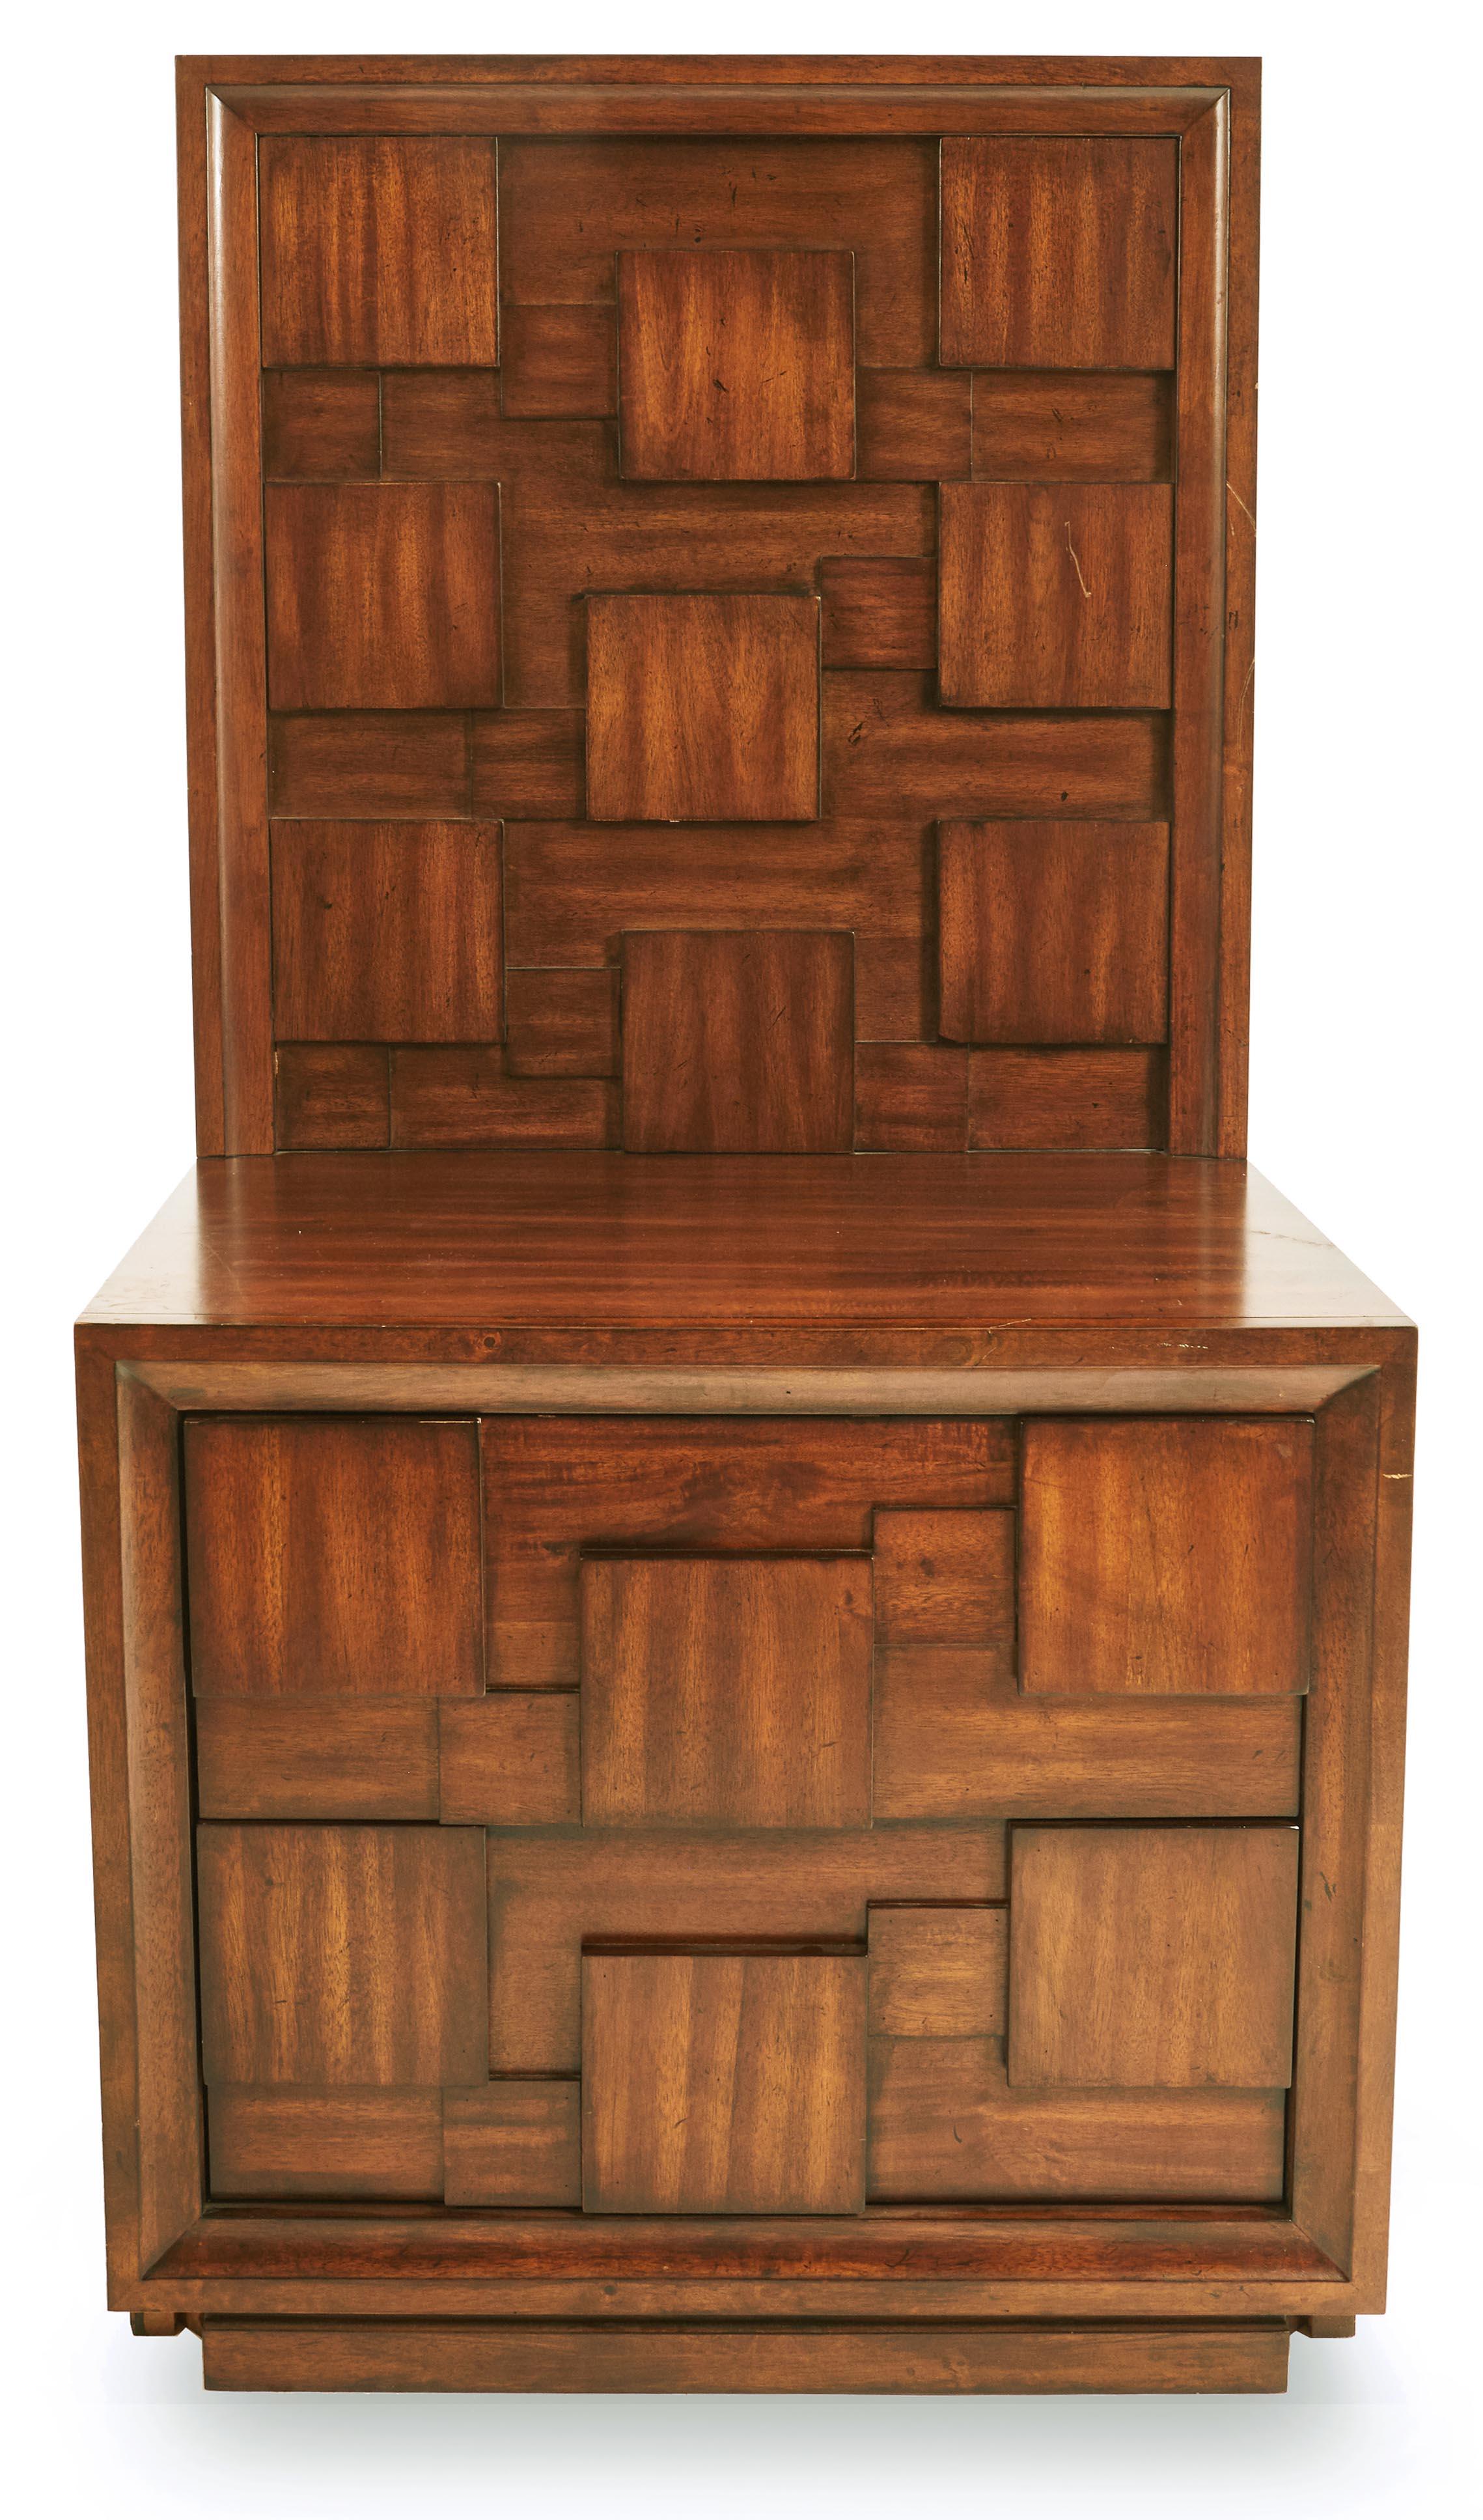 Pair of Brutalist mahogany bedside tables with two drawers and high back panels with a geometric relief design of squares (priced as pair).